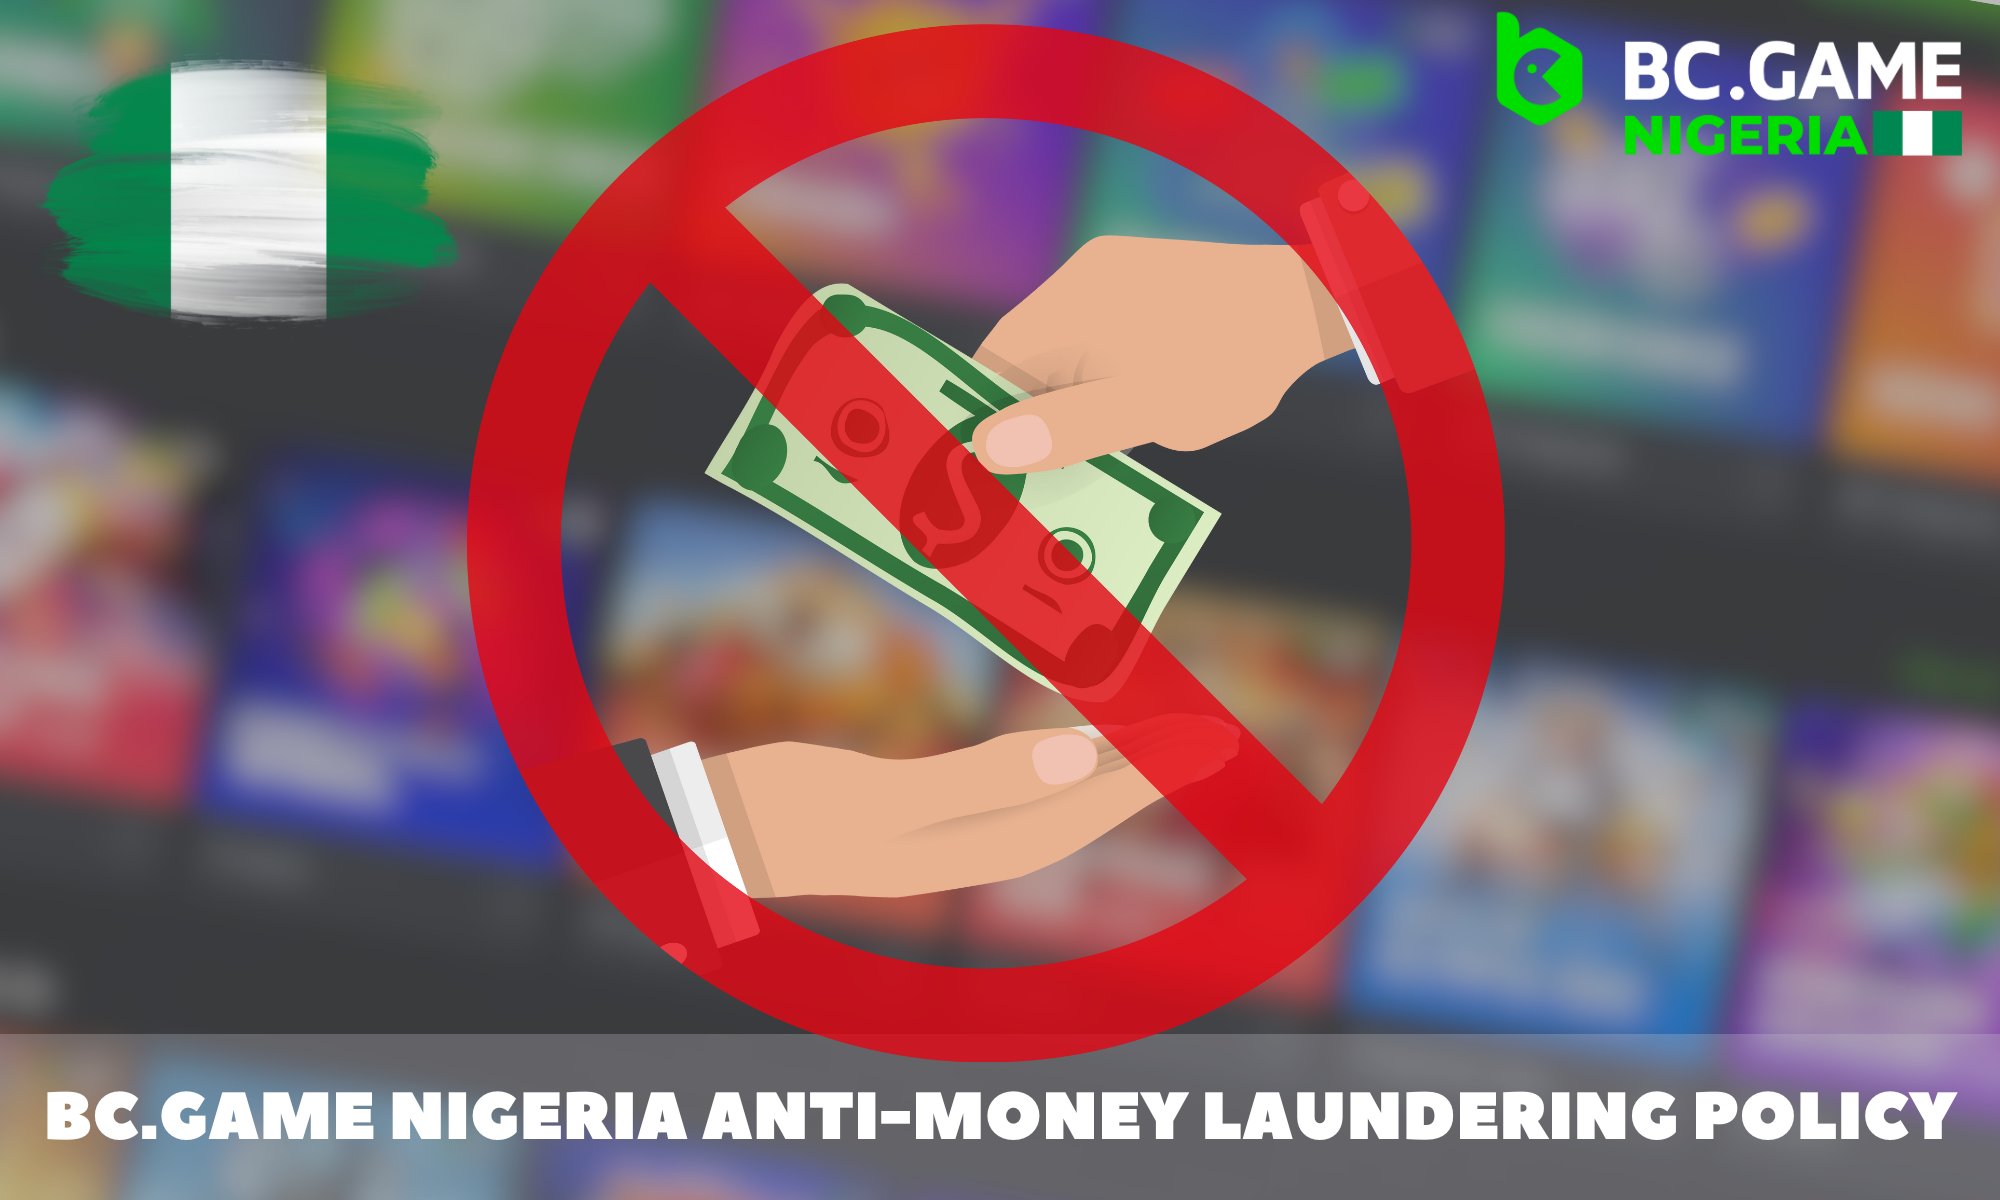 BC.GAME Nigeria is constantly fighting against money laundering